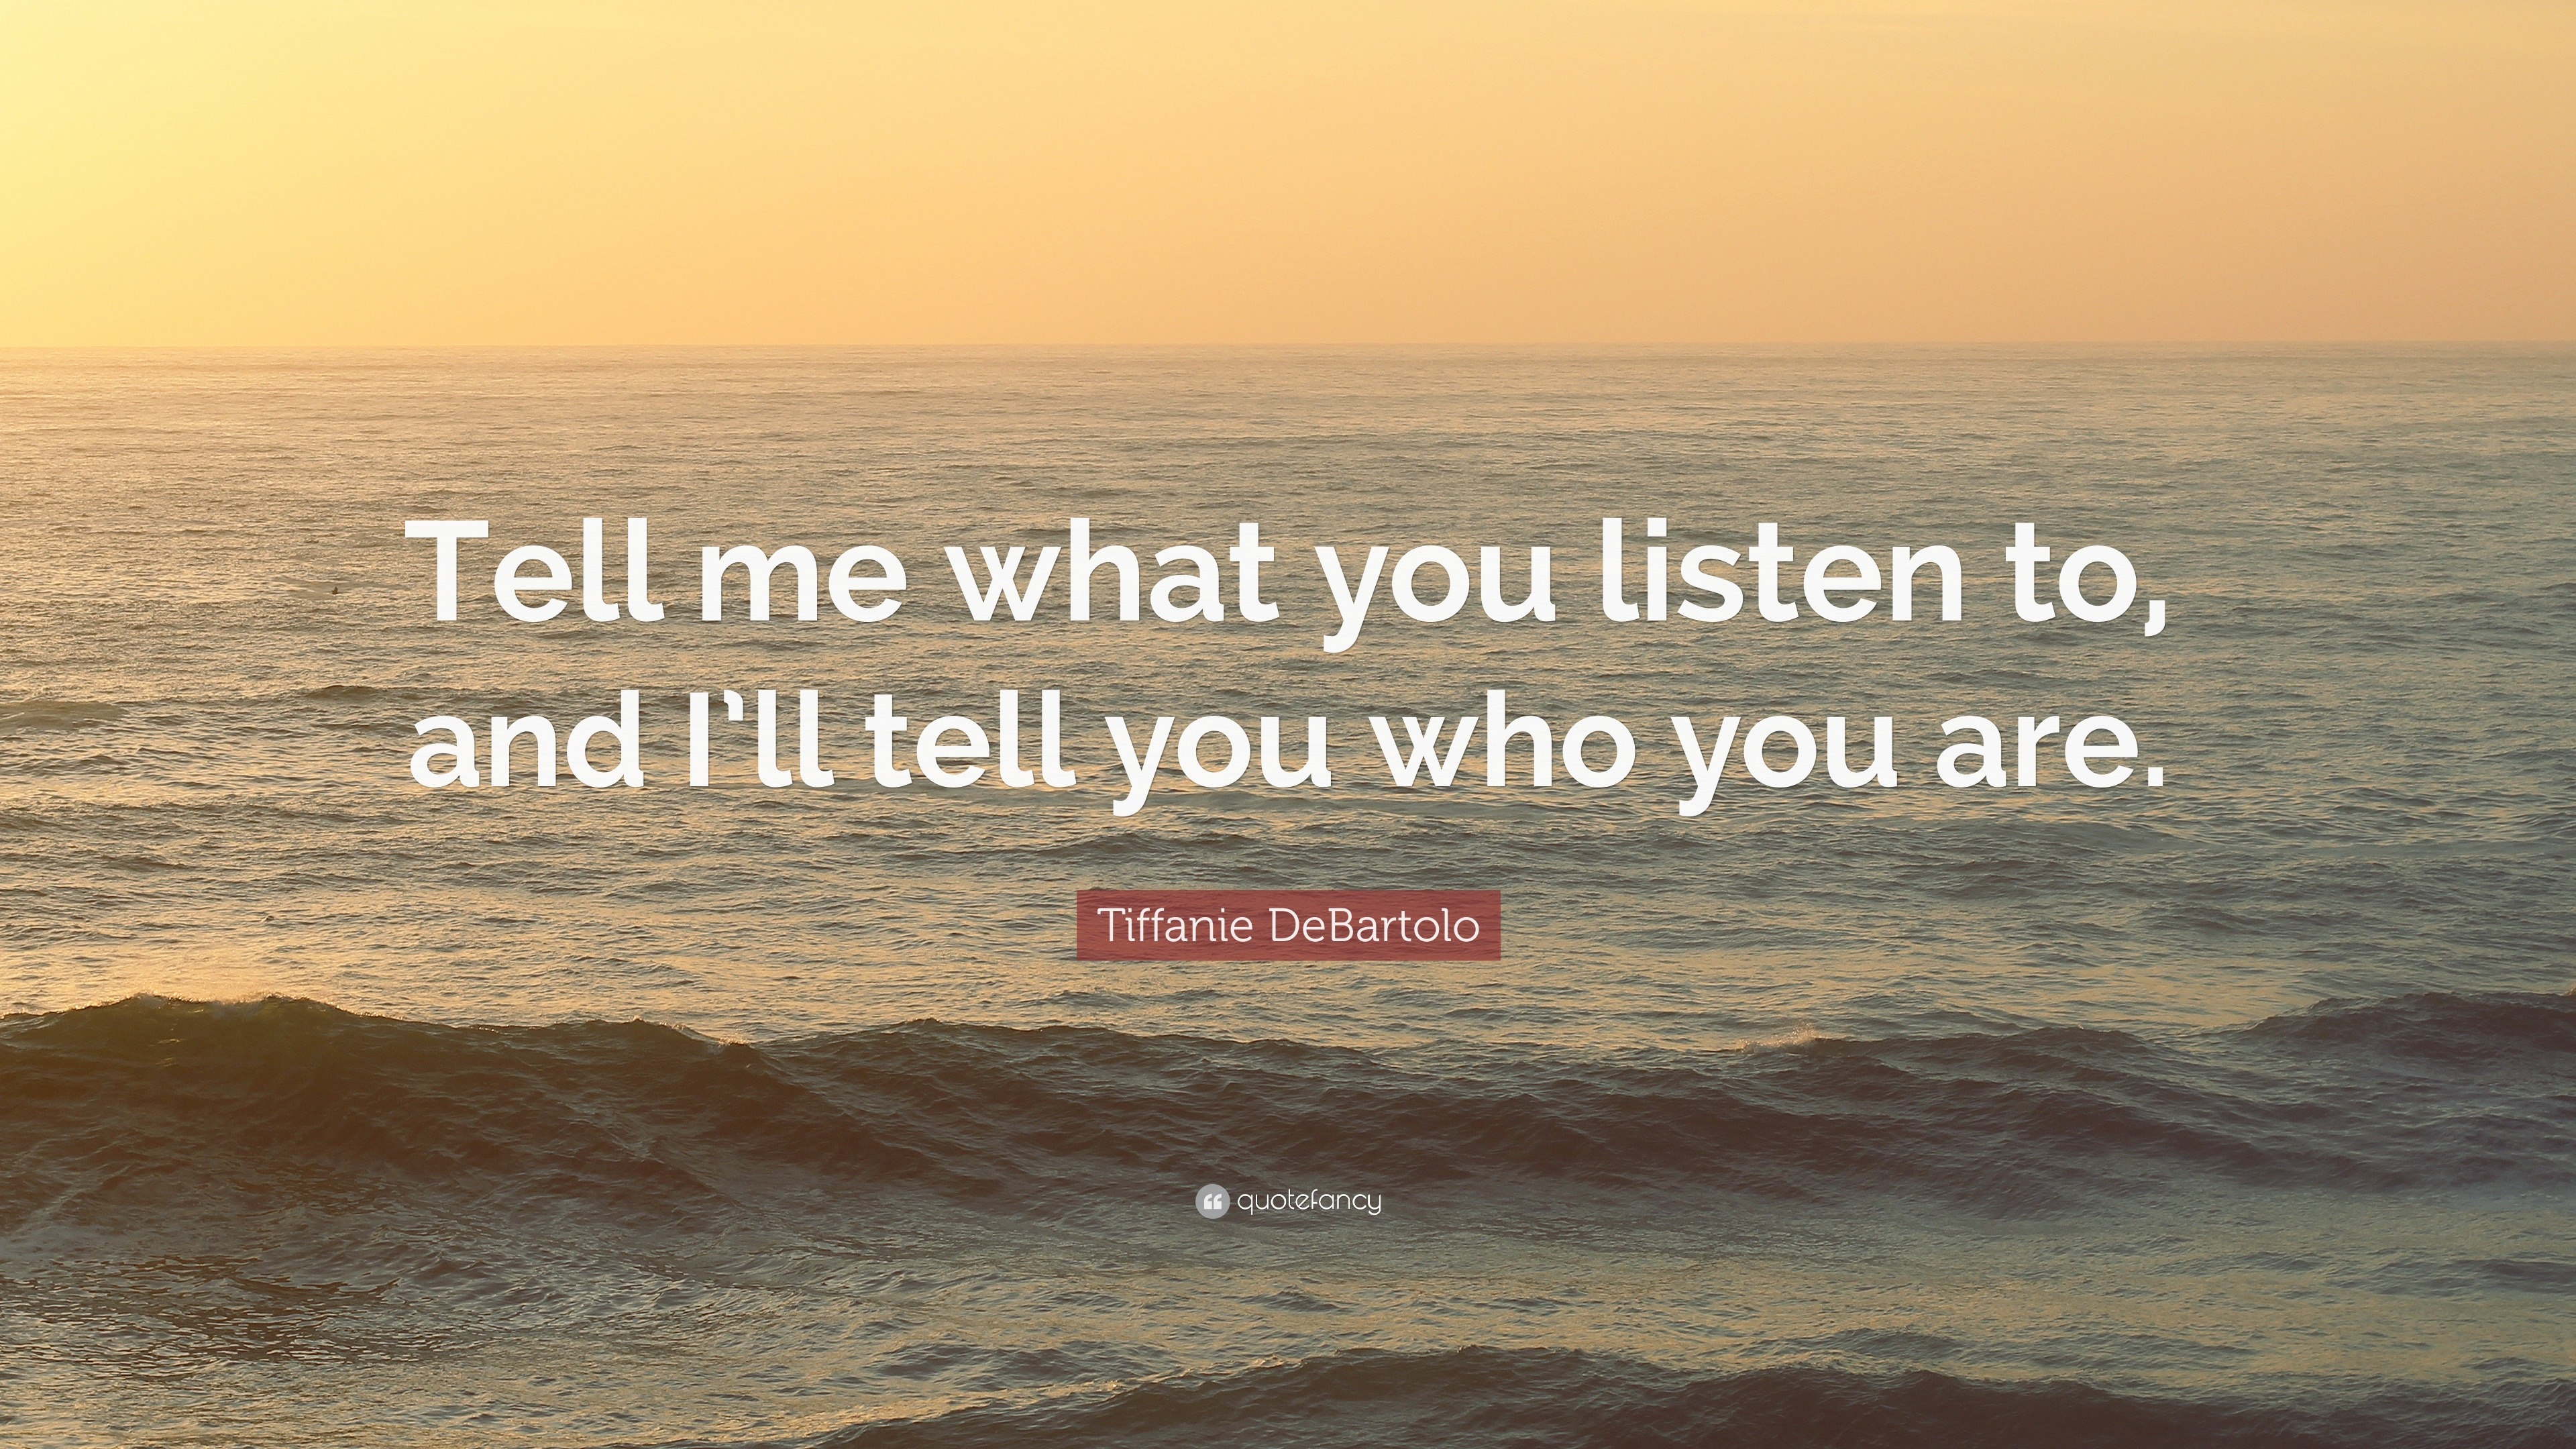 Tiffanie DeBartolo Quote: “Tell me what you listen to, and I’ll tell ...